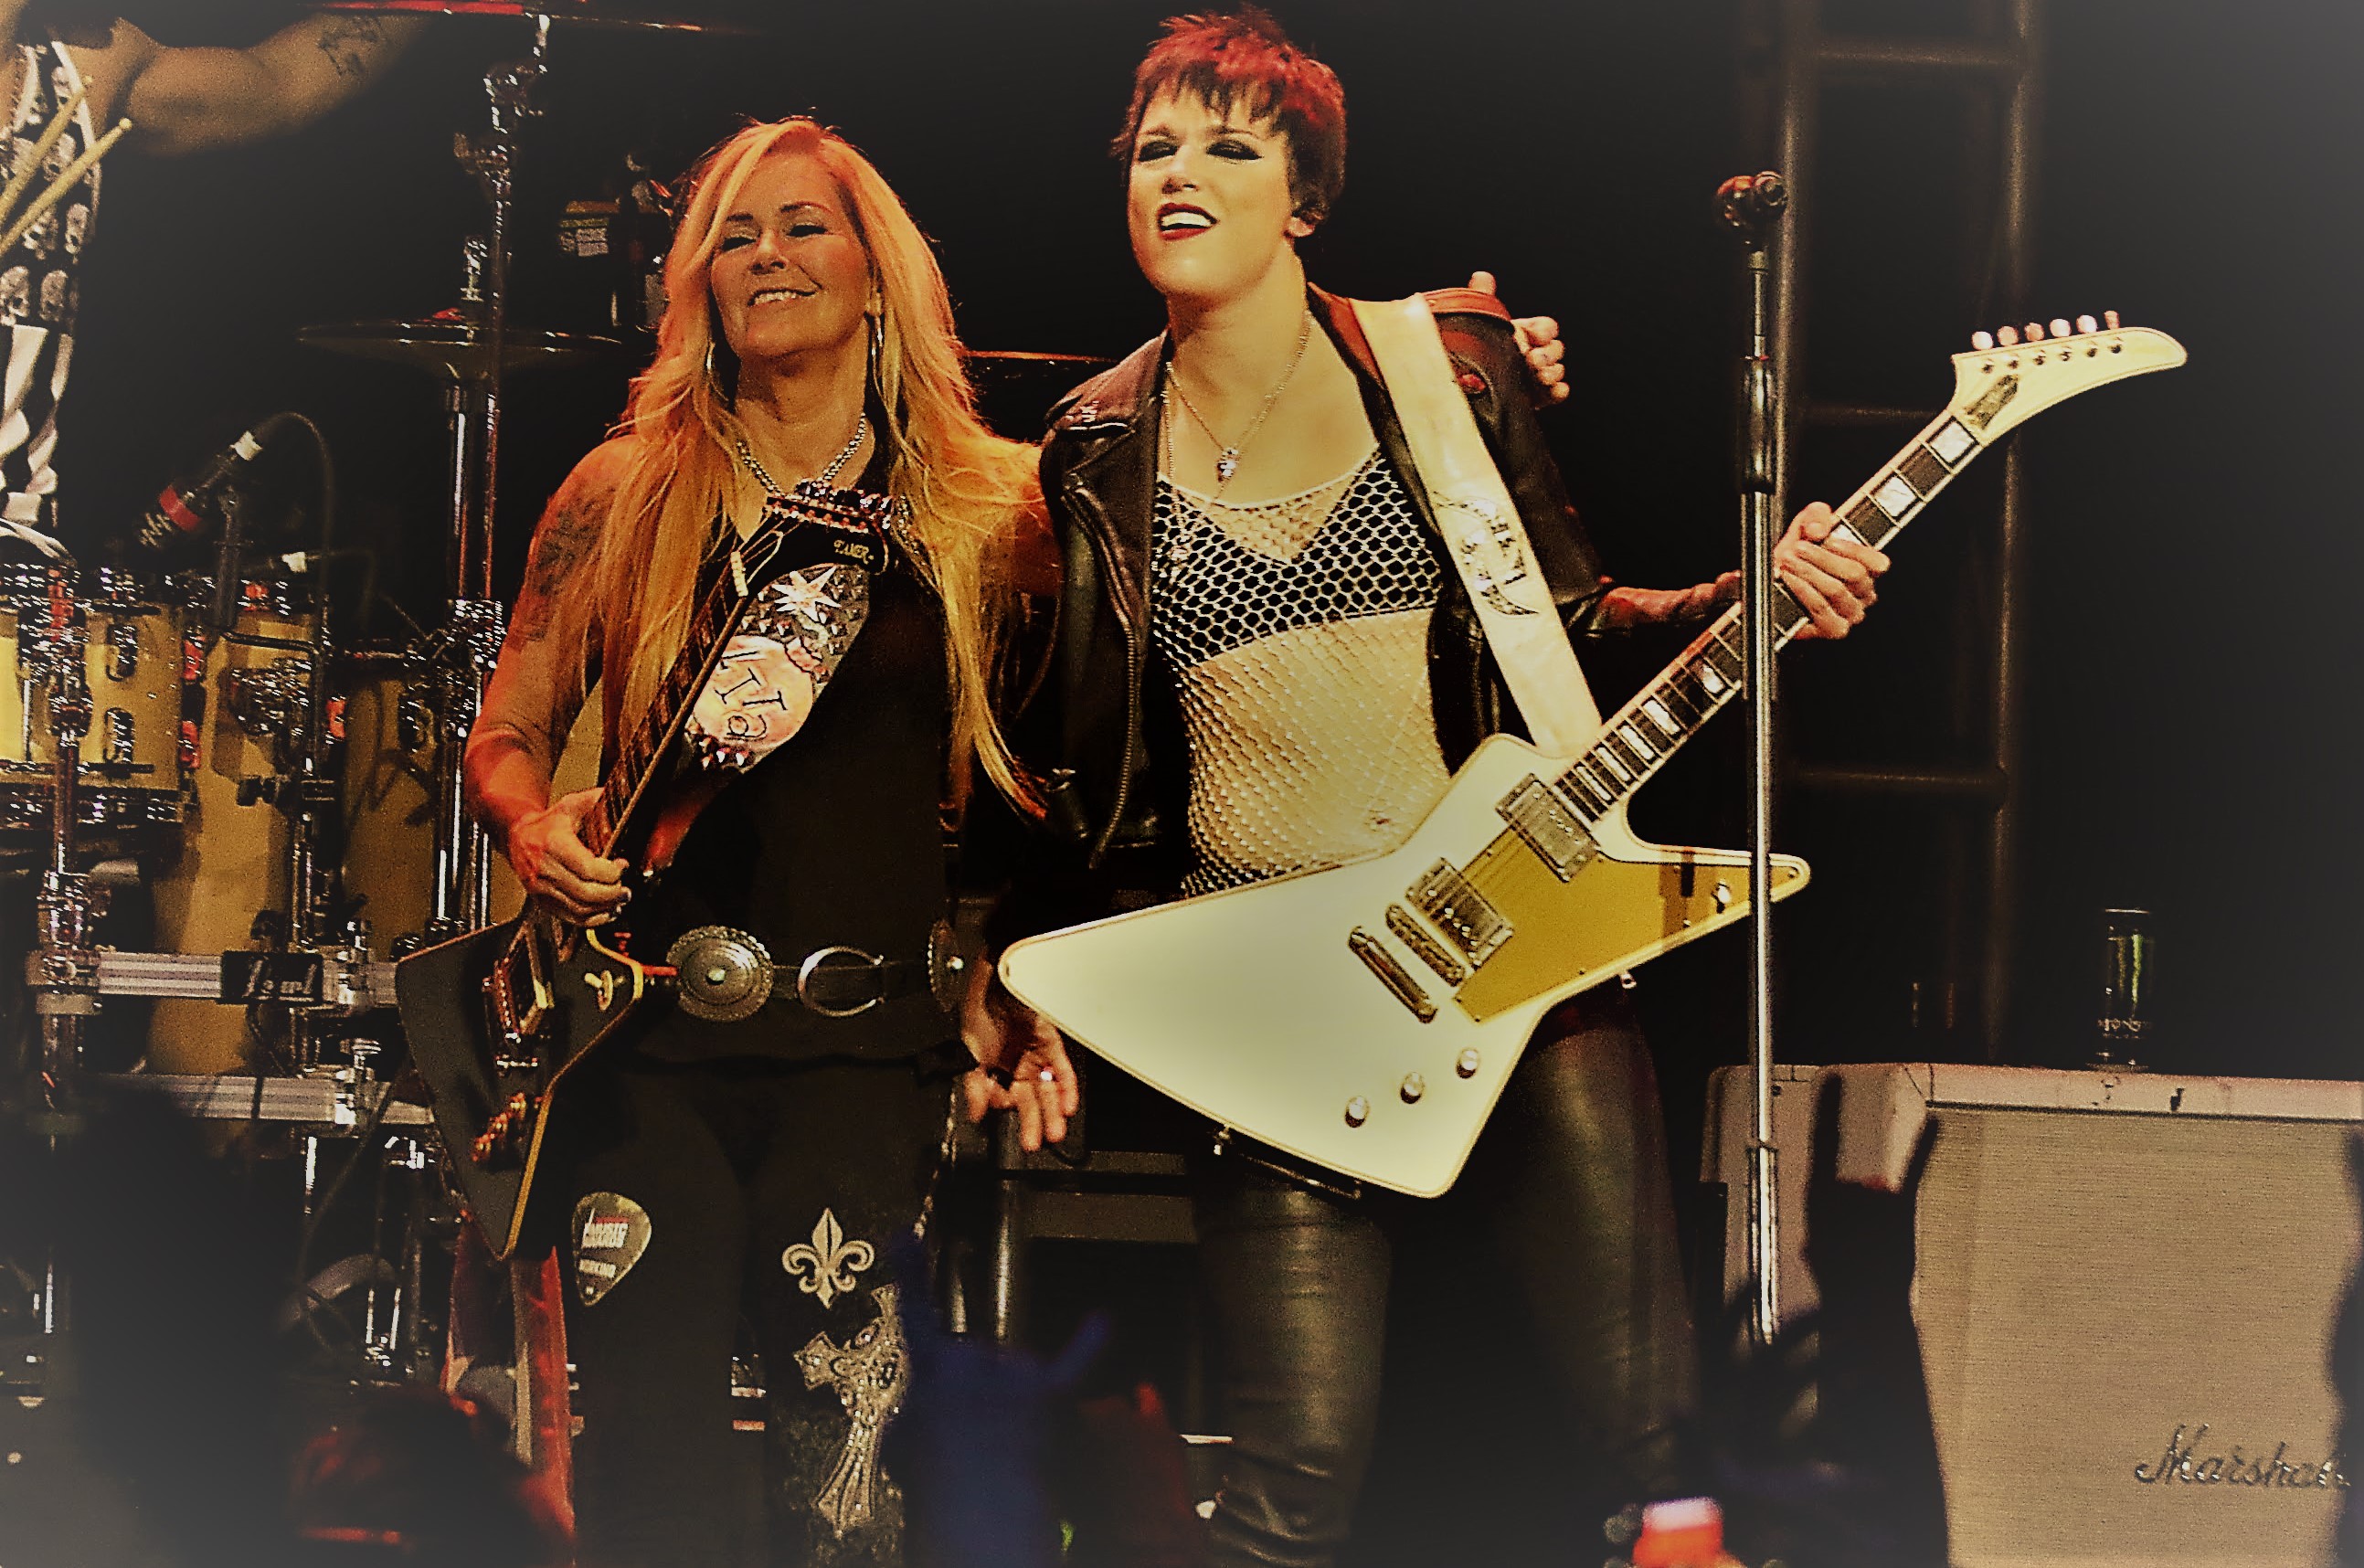 Lita Ford with Hale